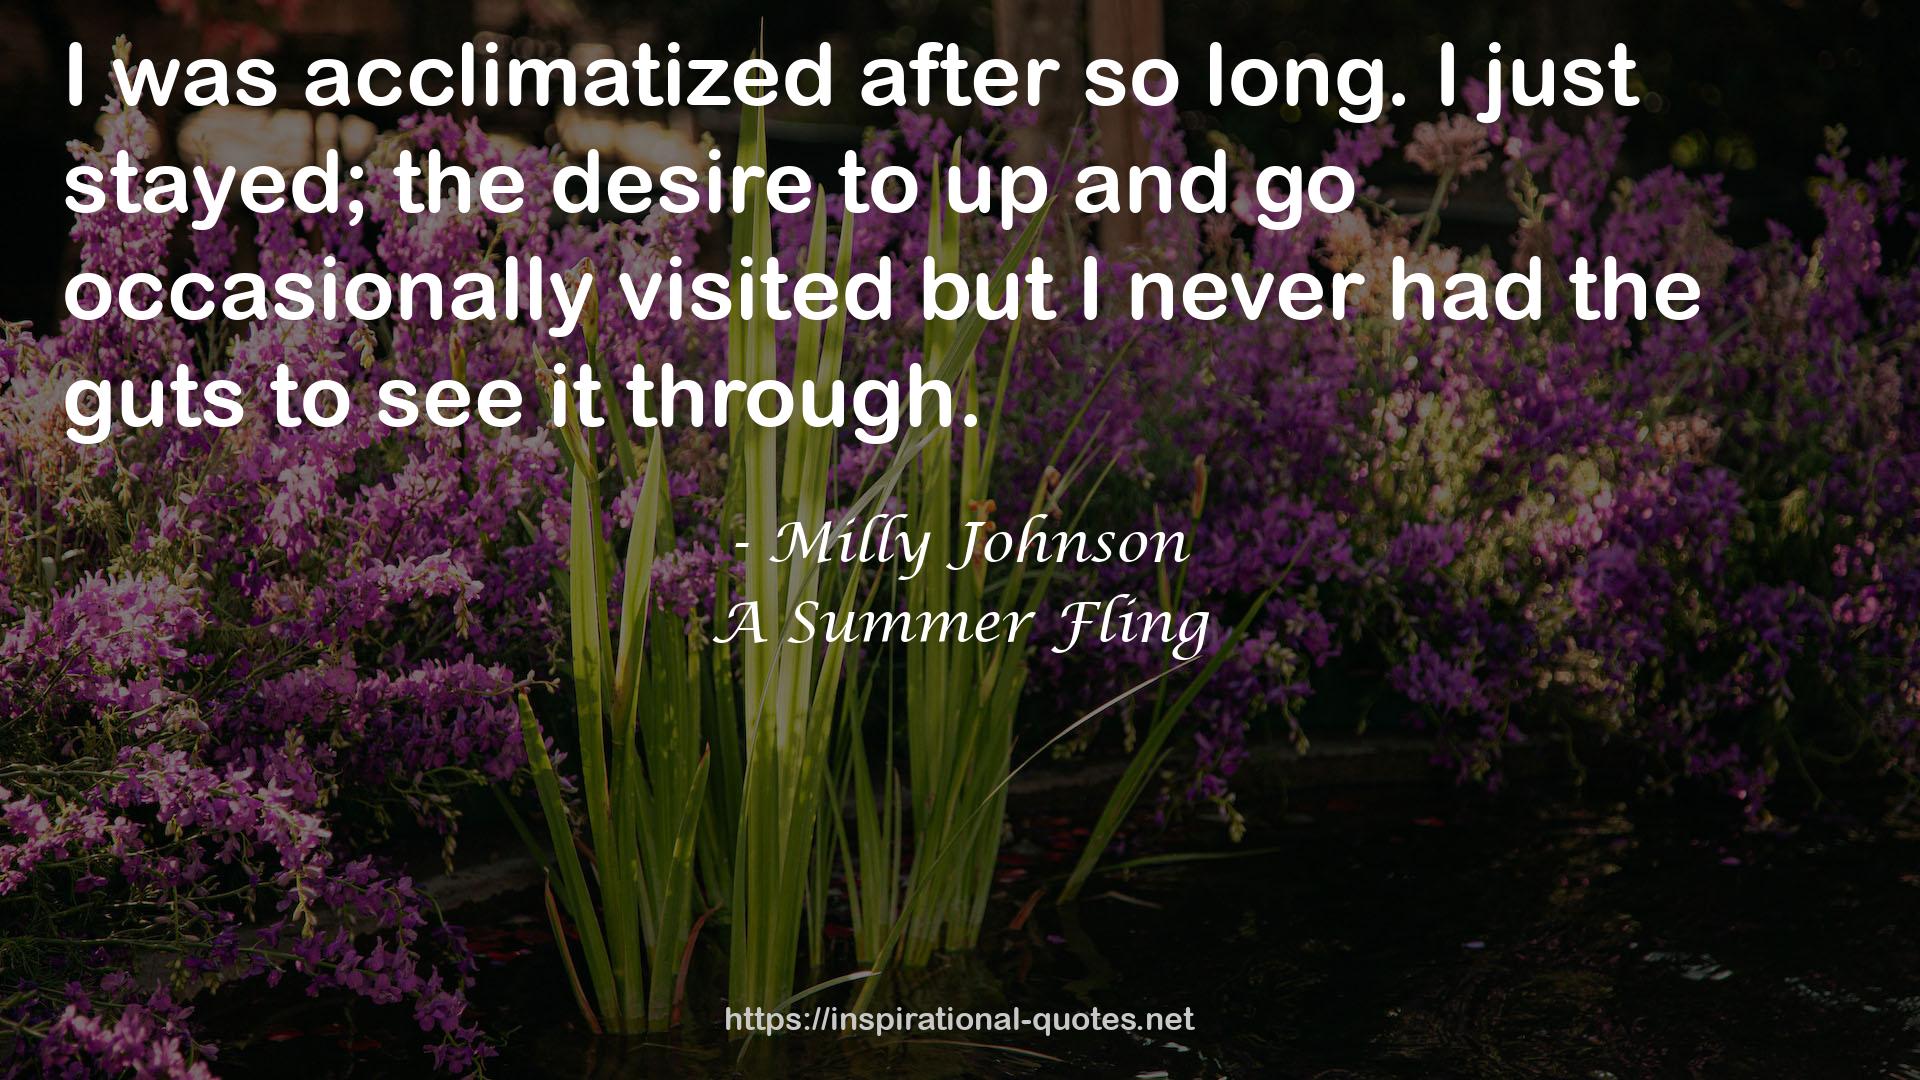 Milly Johnson QUOTES